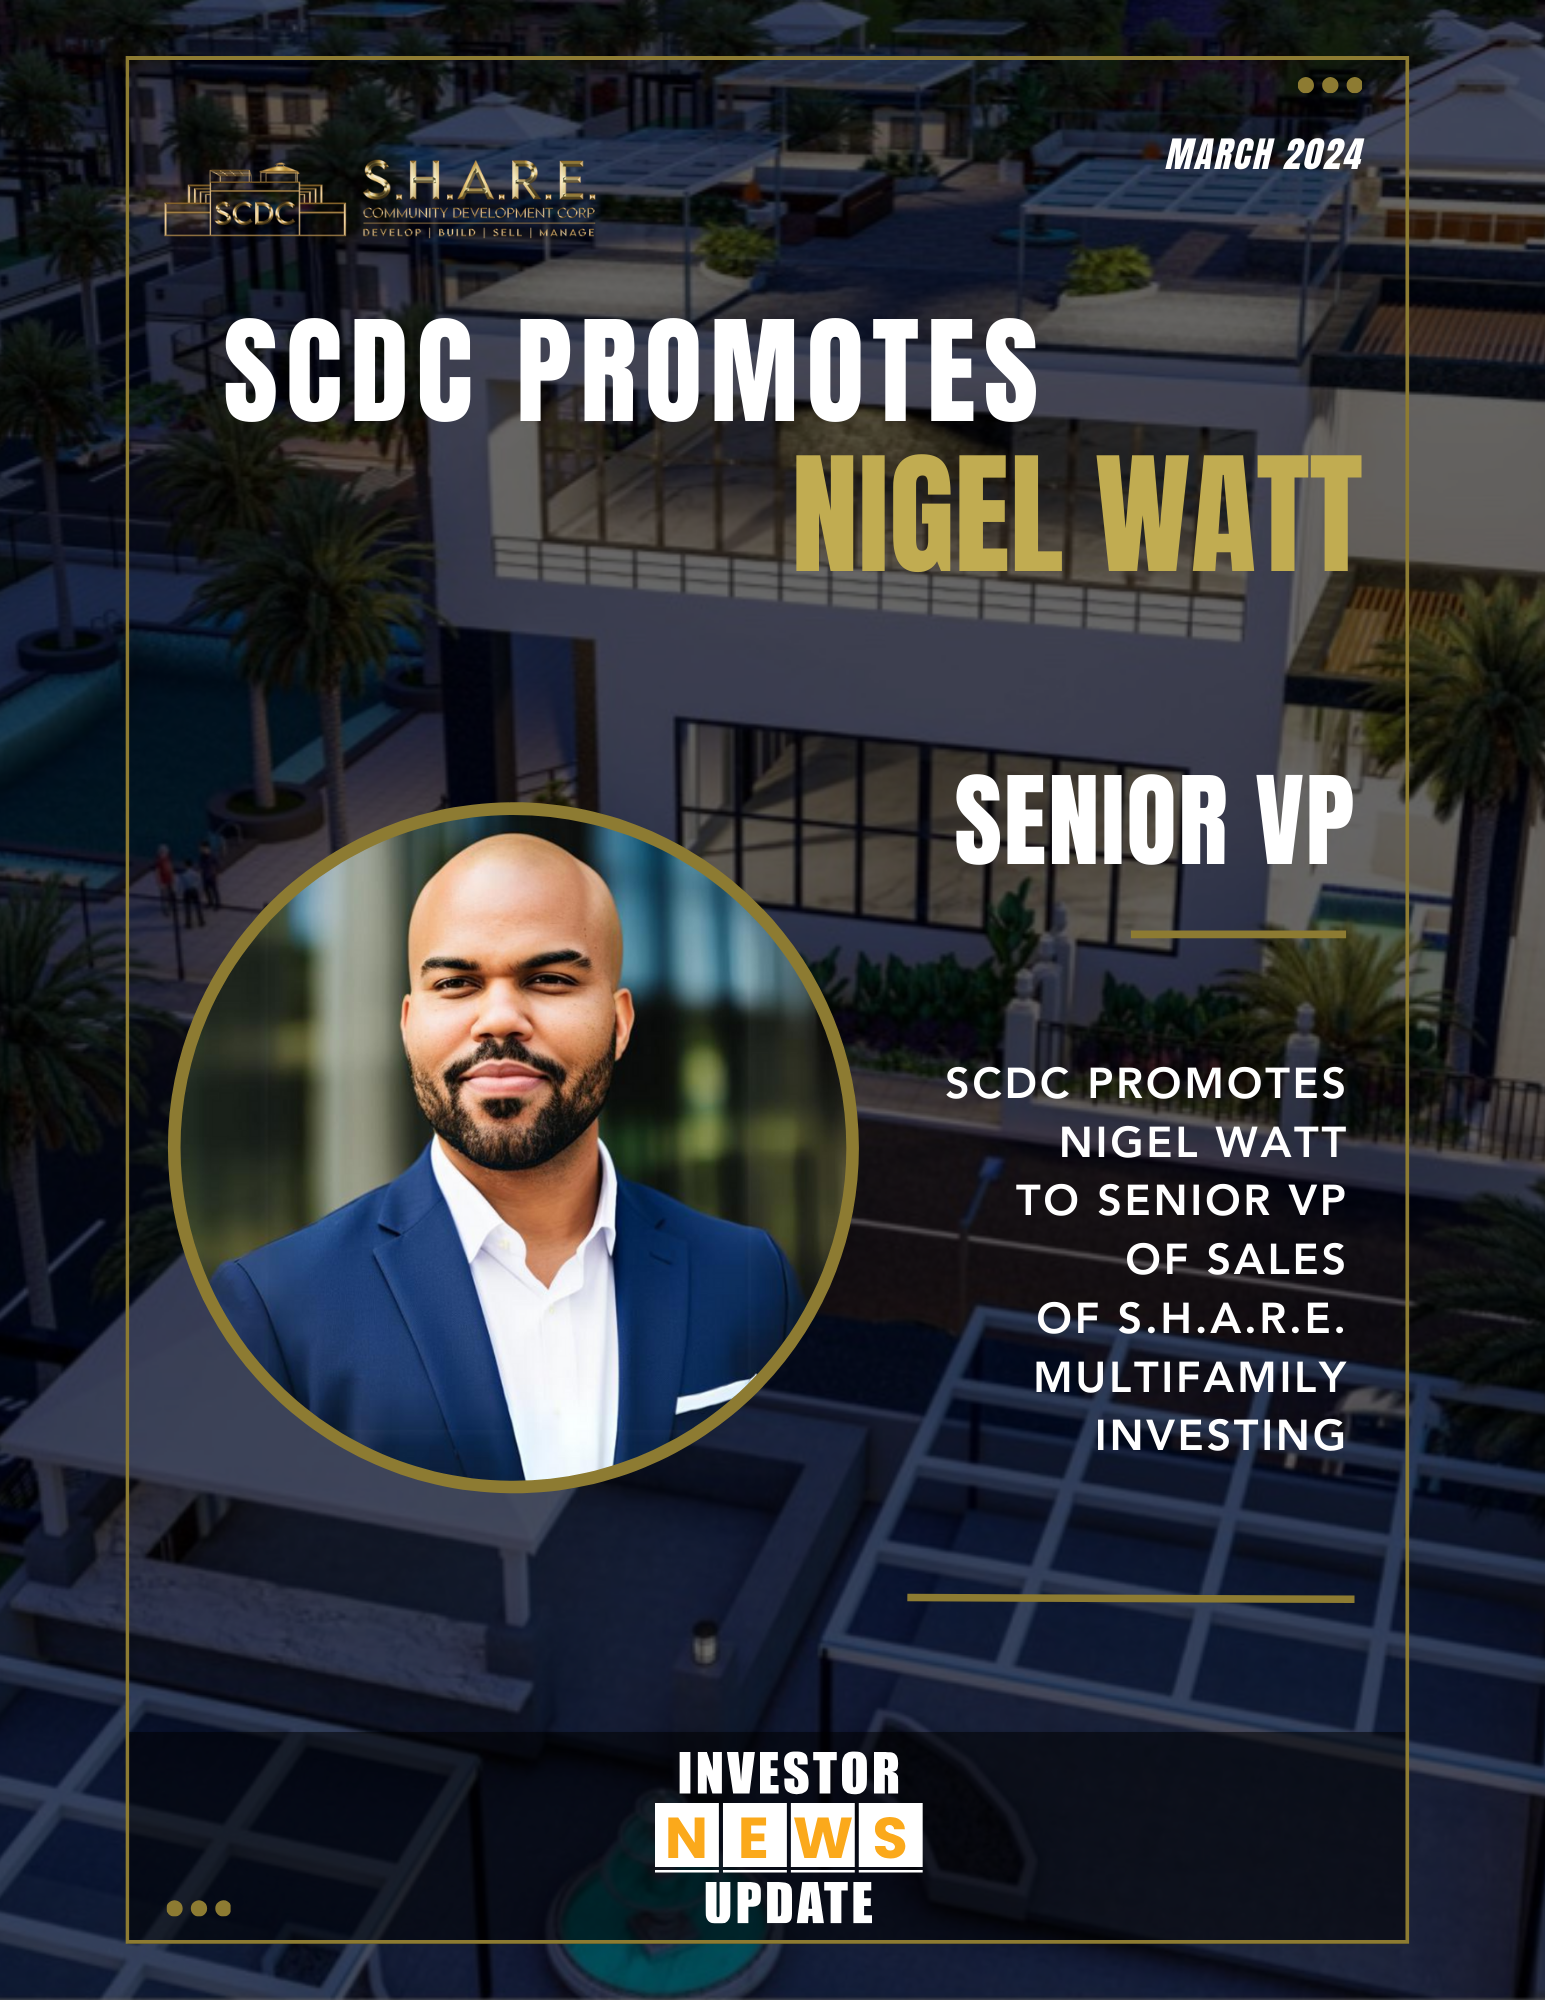 SCDC Promotes Nigel Watt to Senior Vice President of Sales at S.H.A.R.E. Multifamily Investments